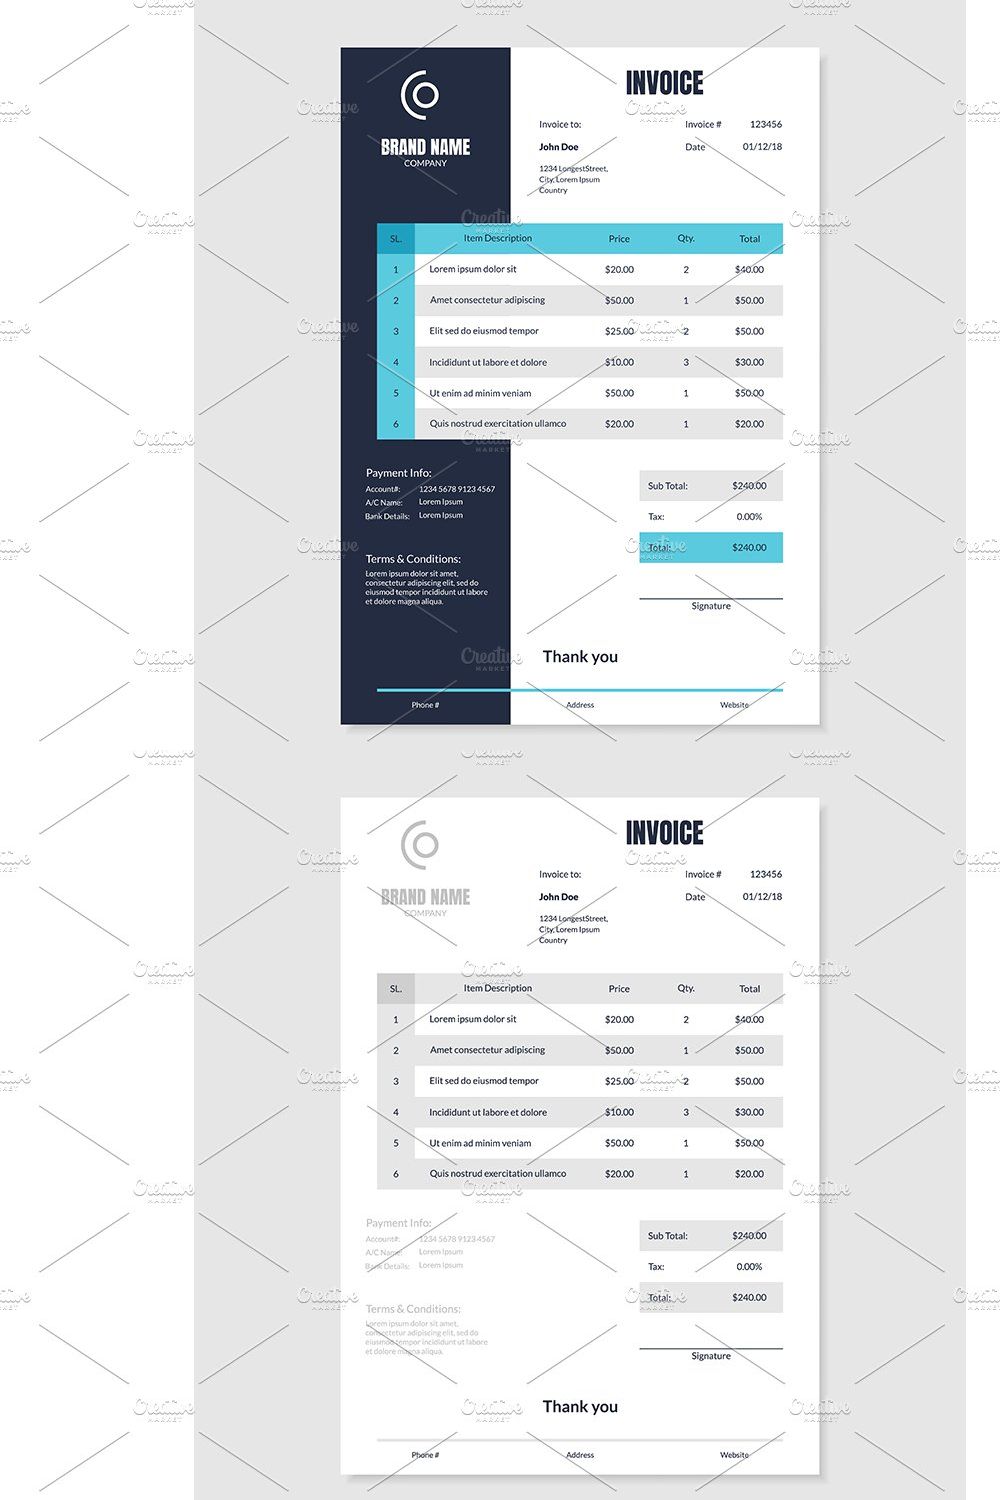 Quotation Invoice Layout Template pinterest preview image.